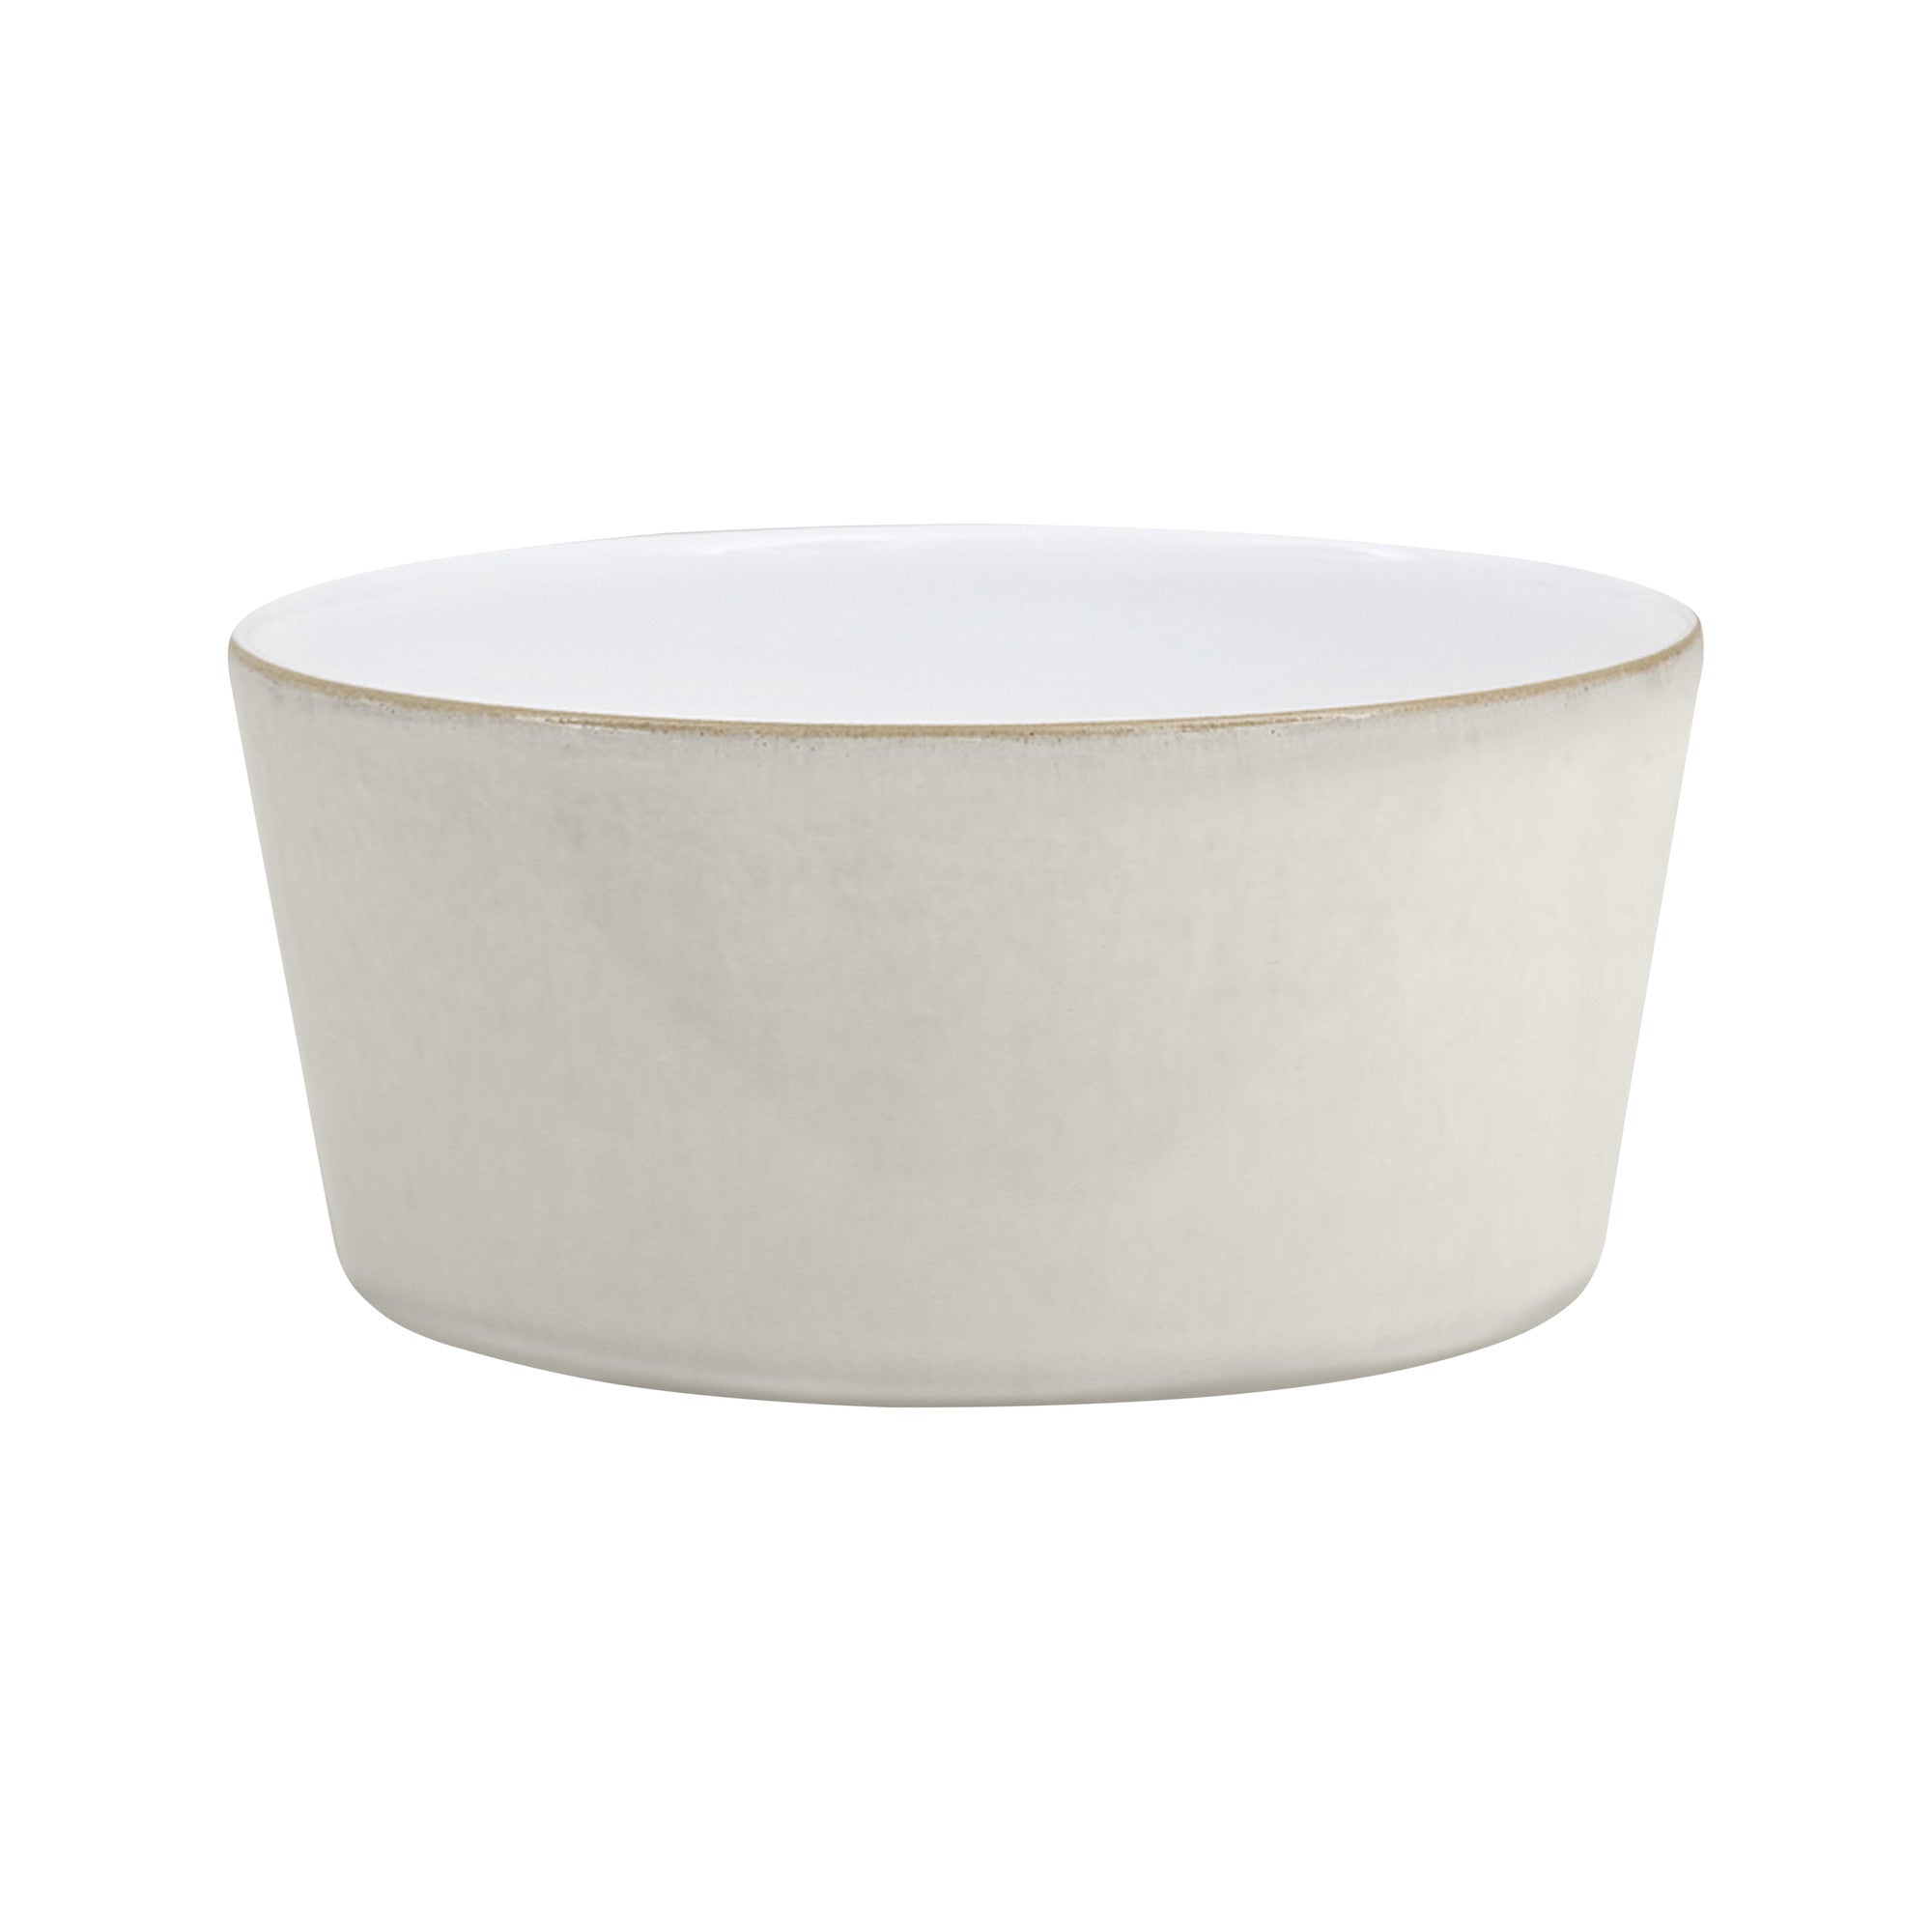 Denby Natural Canvas Straight Rice Bowl - Last Chance to Buy